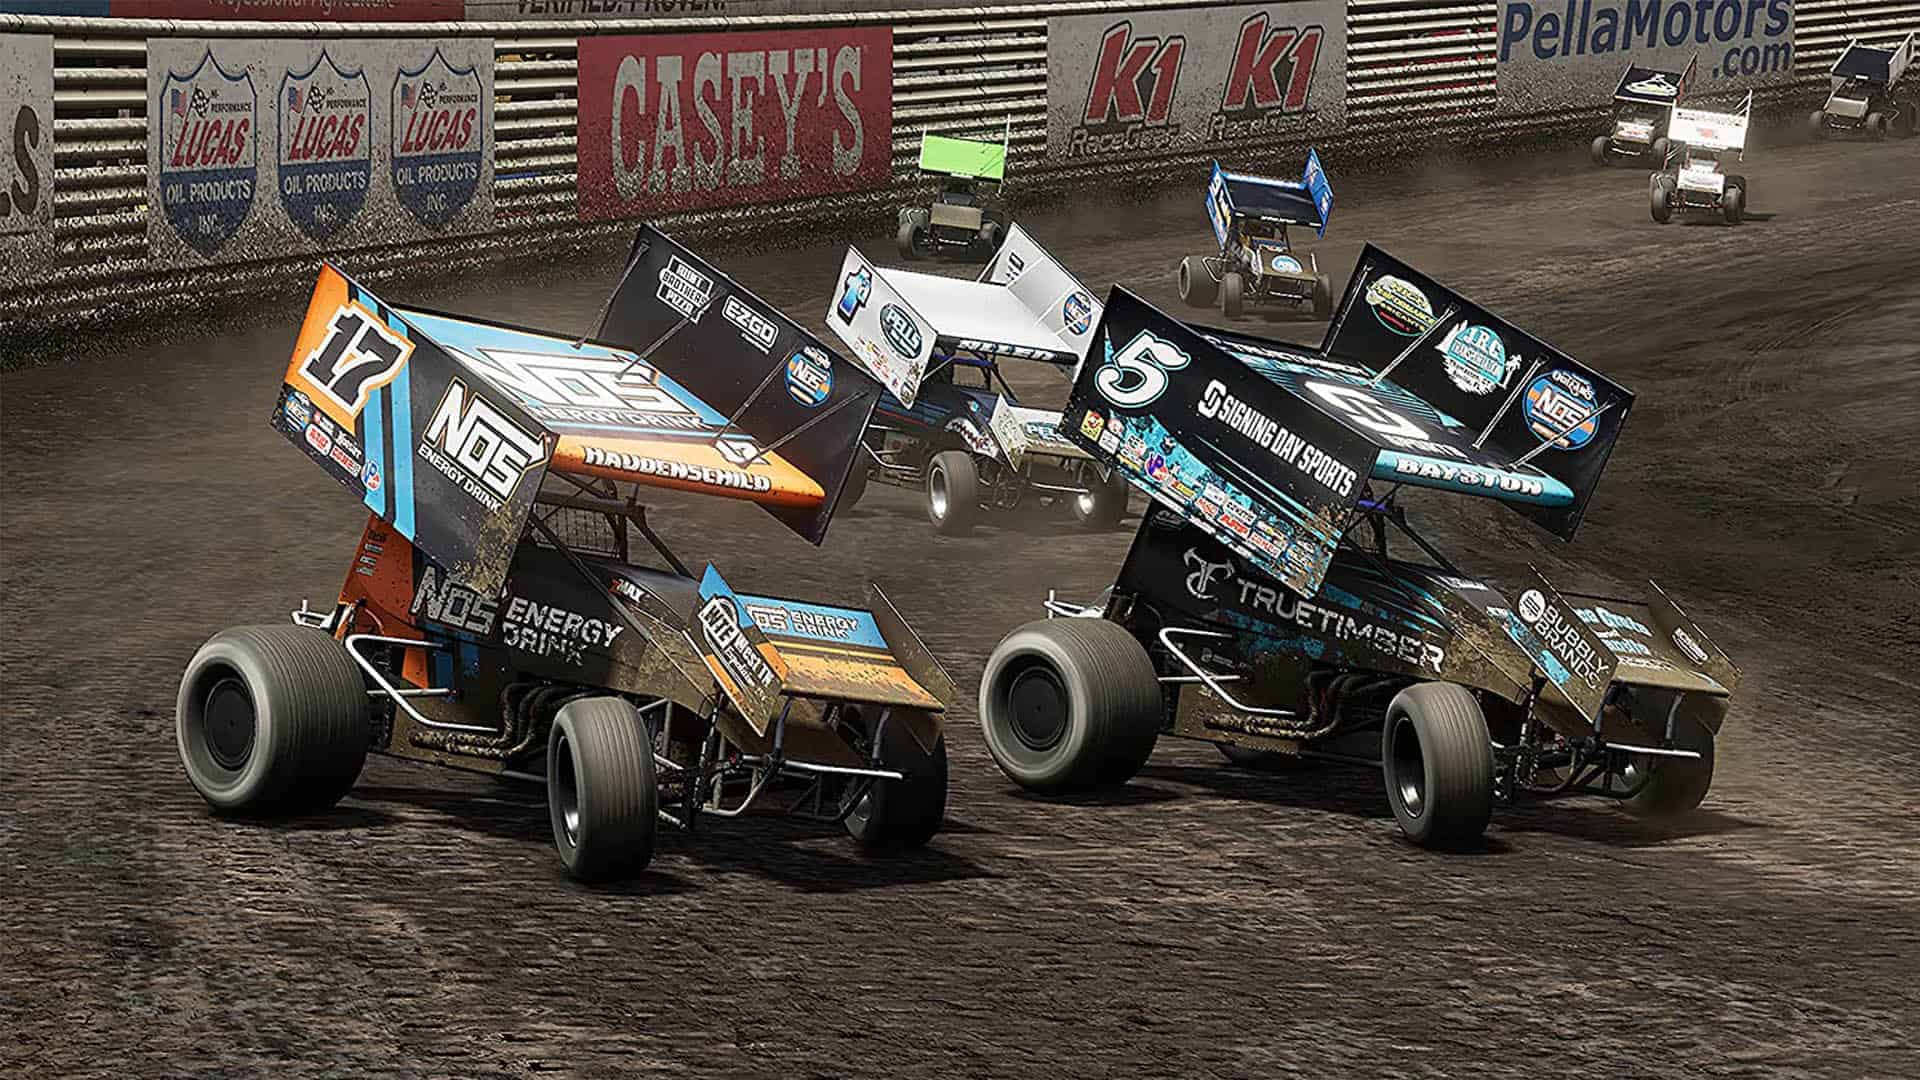 Scenes from the game World of Outlaws: Dirt Racing